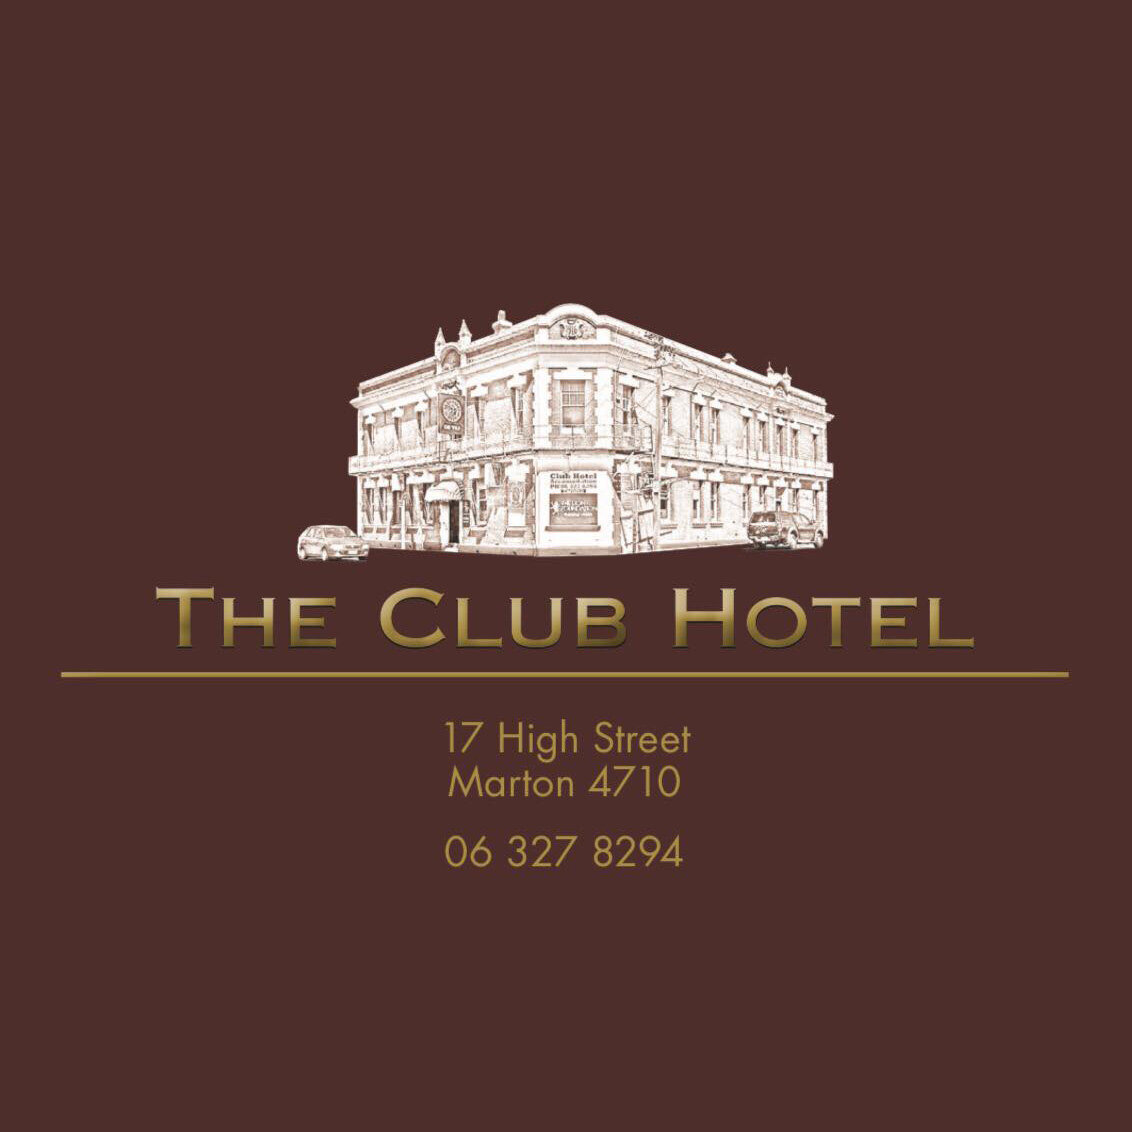 TheClubHotel.jpg